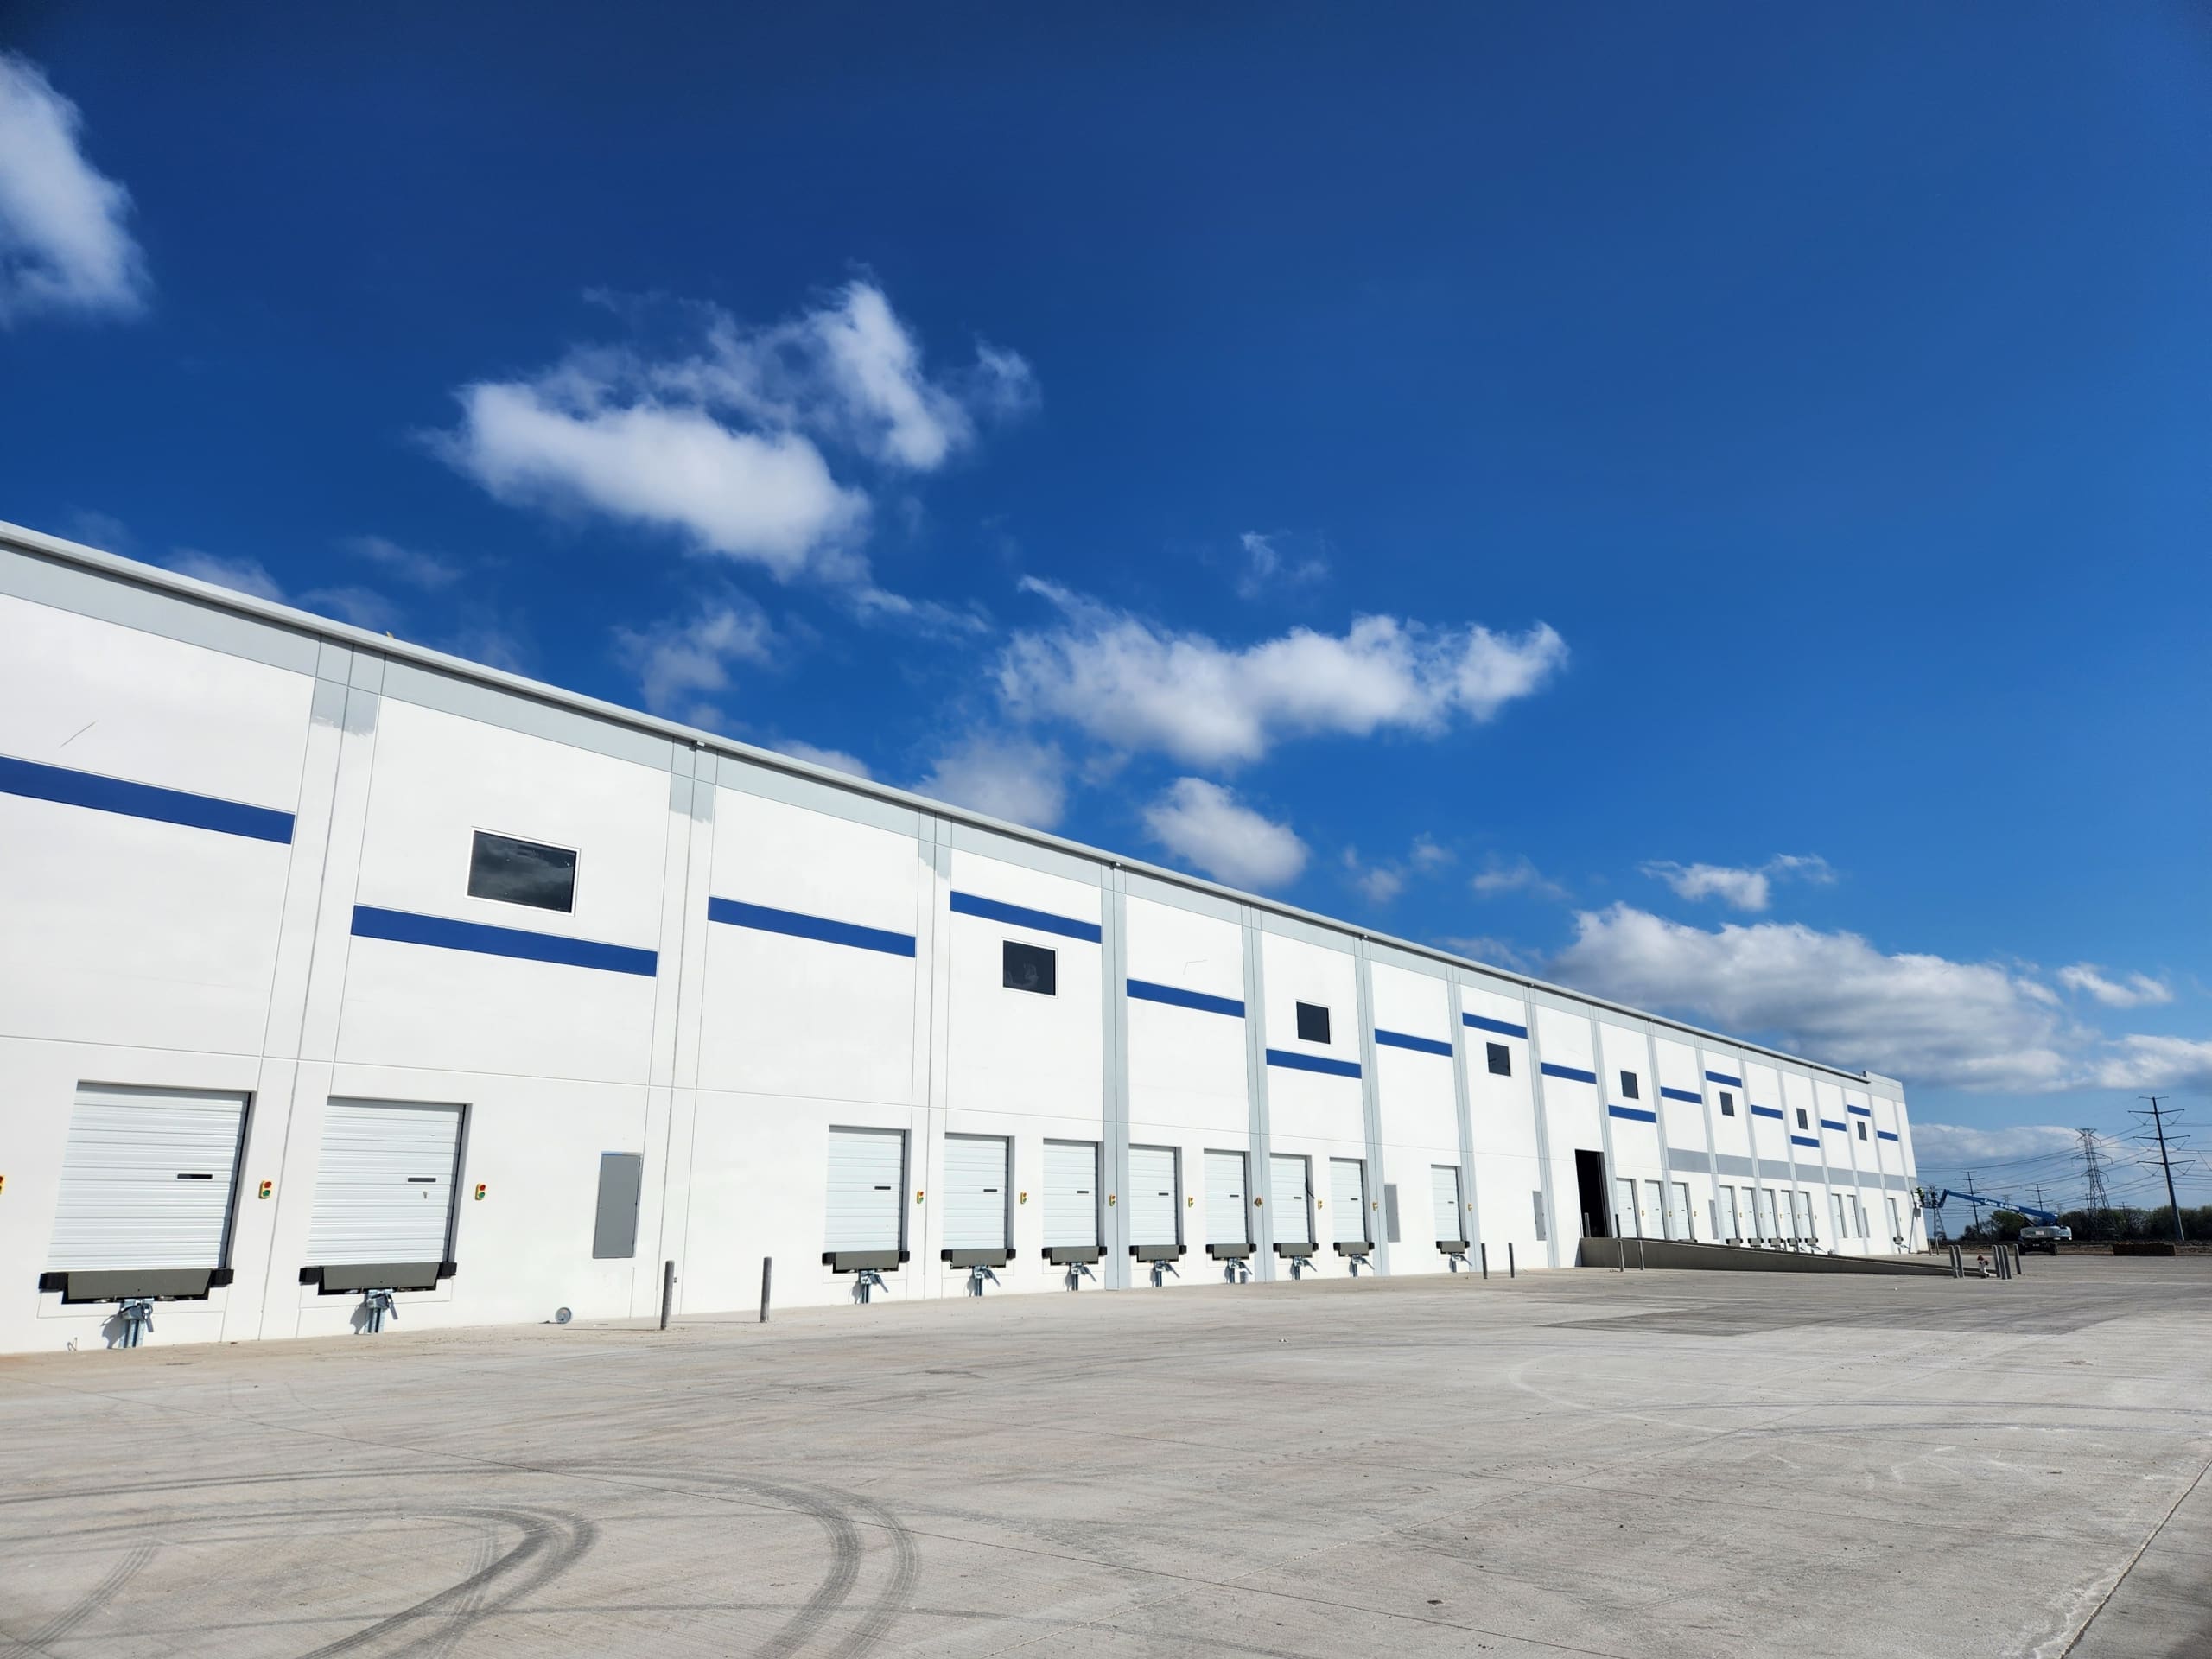 A large warehouse building with blue and white shutters.